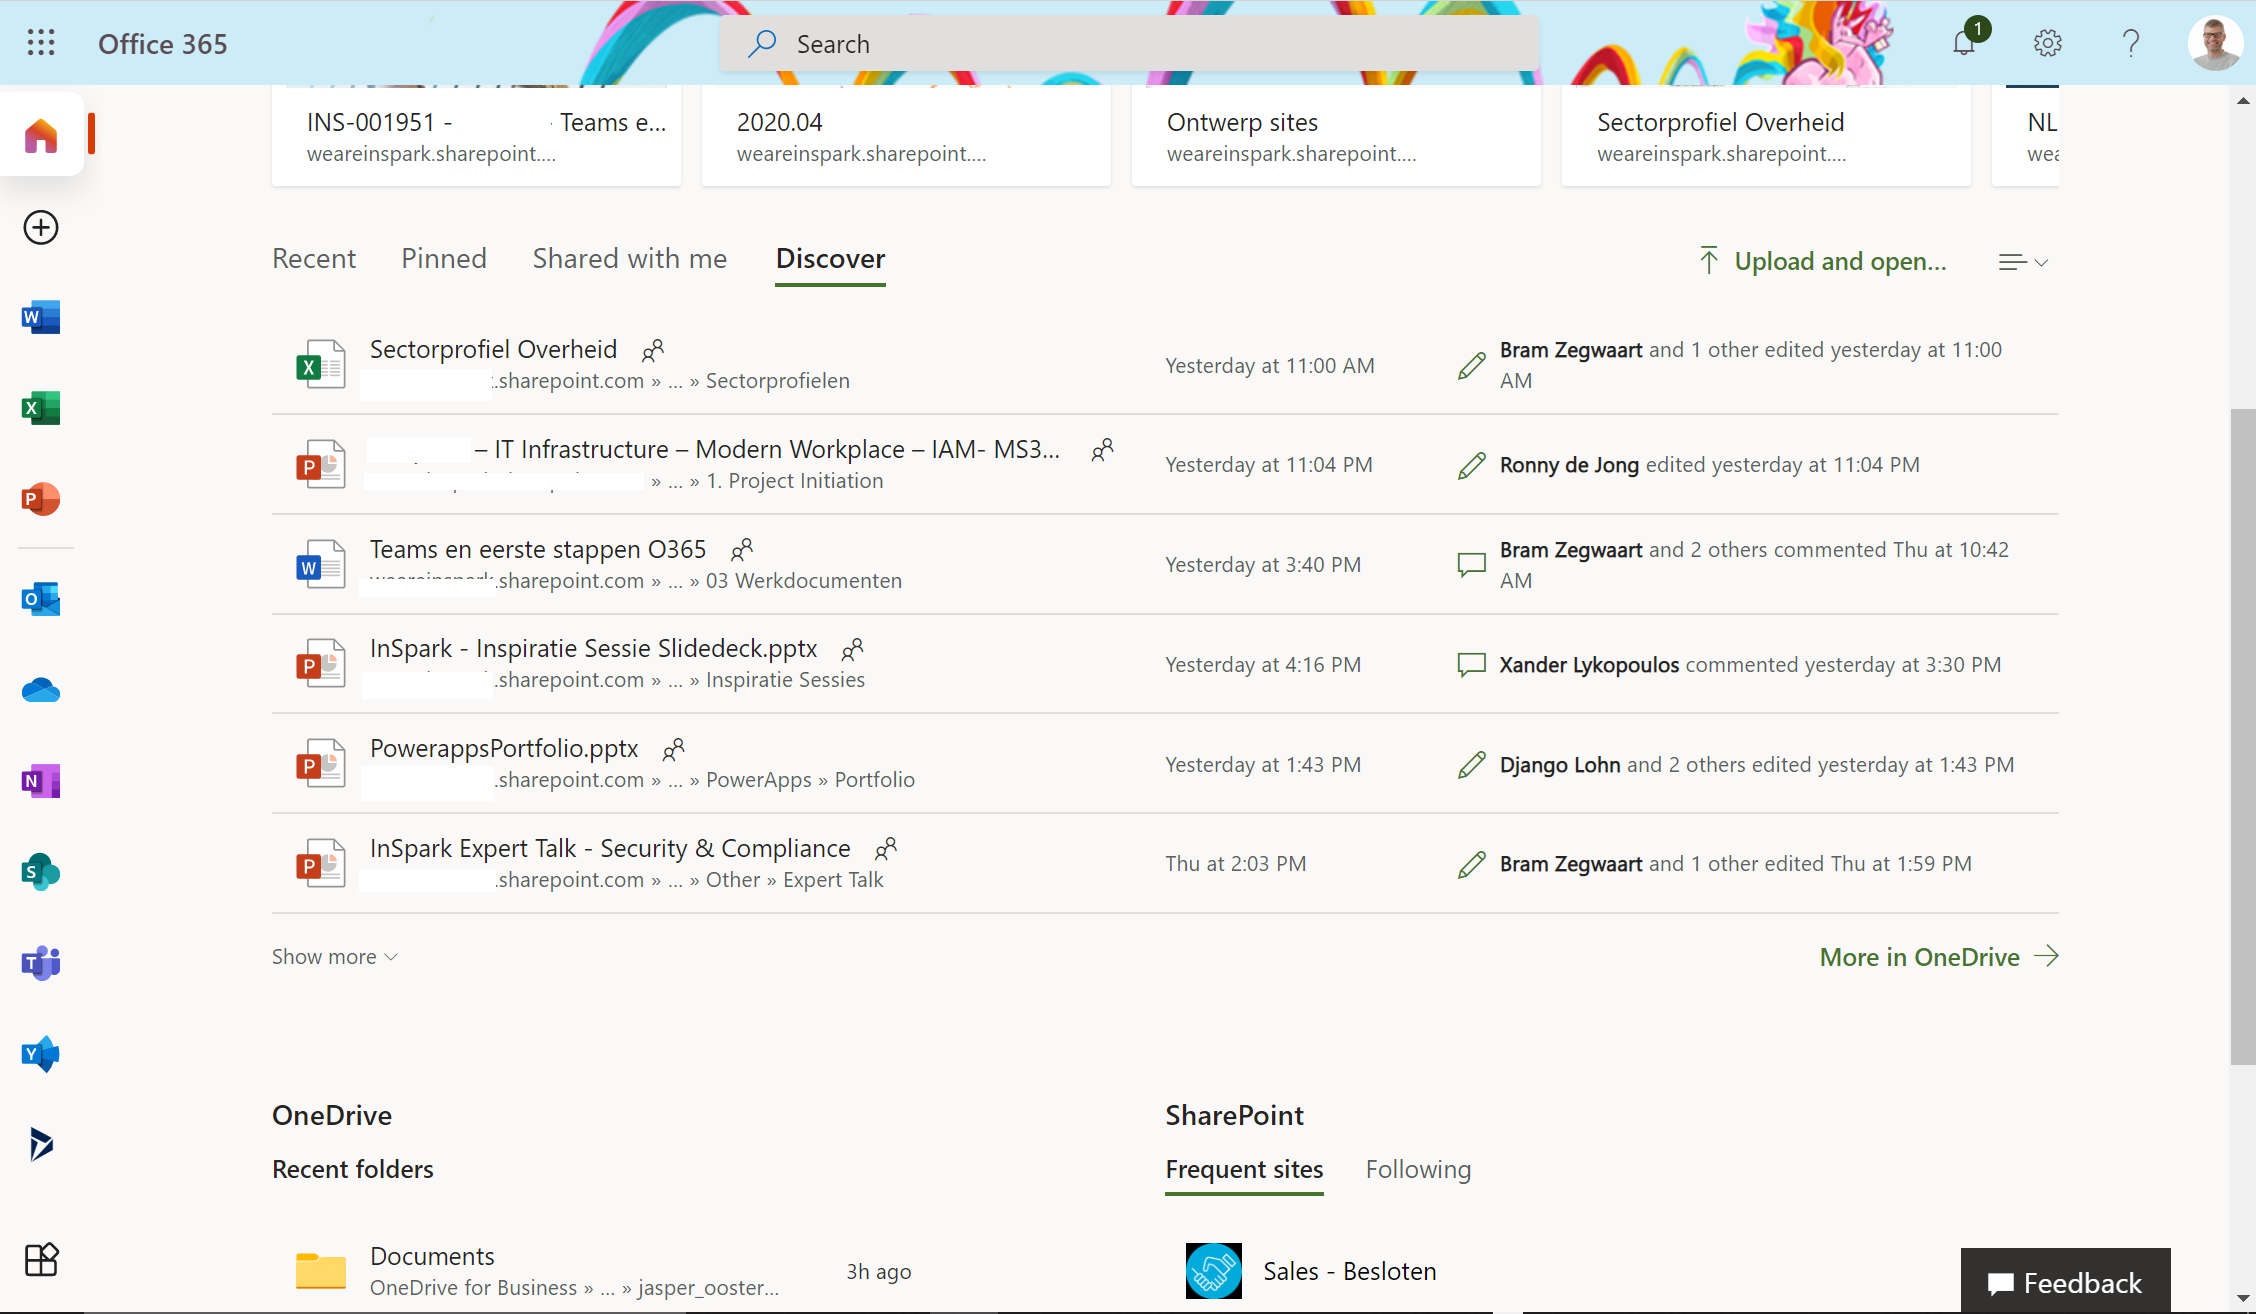 Screenshot of the Discover view on Office.com